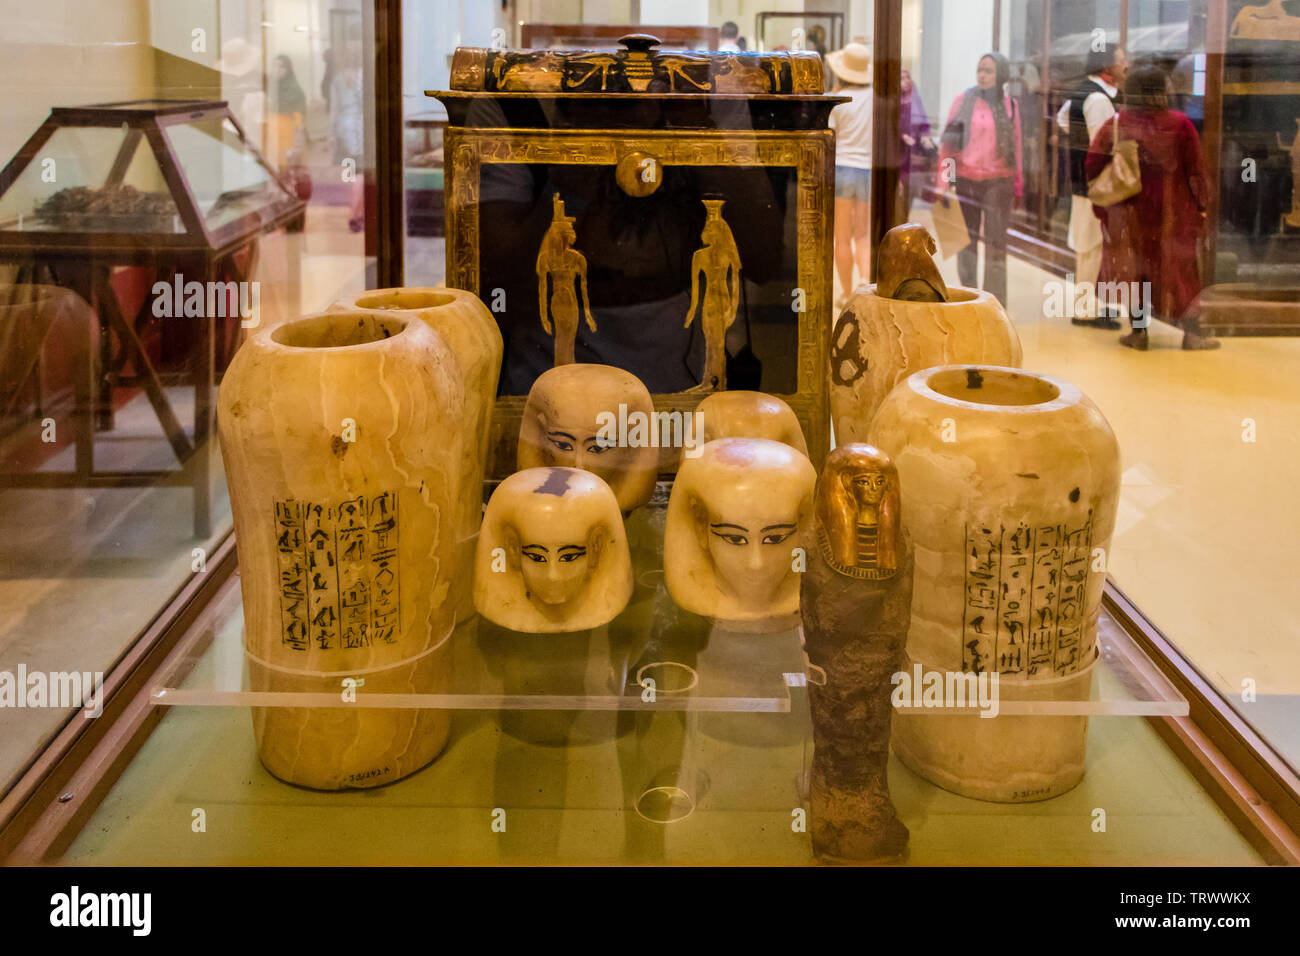 Cairo, Egypt - April 19, 2019: The artifacts in the Egyptian Museum in Cairo Stock Photo